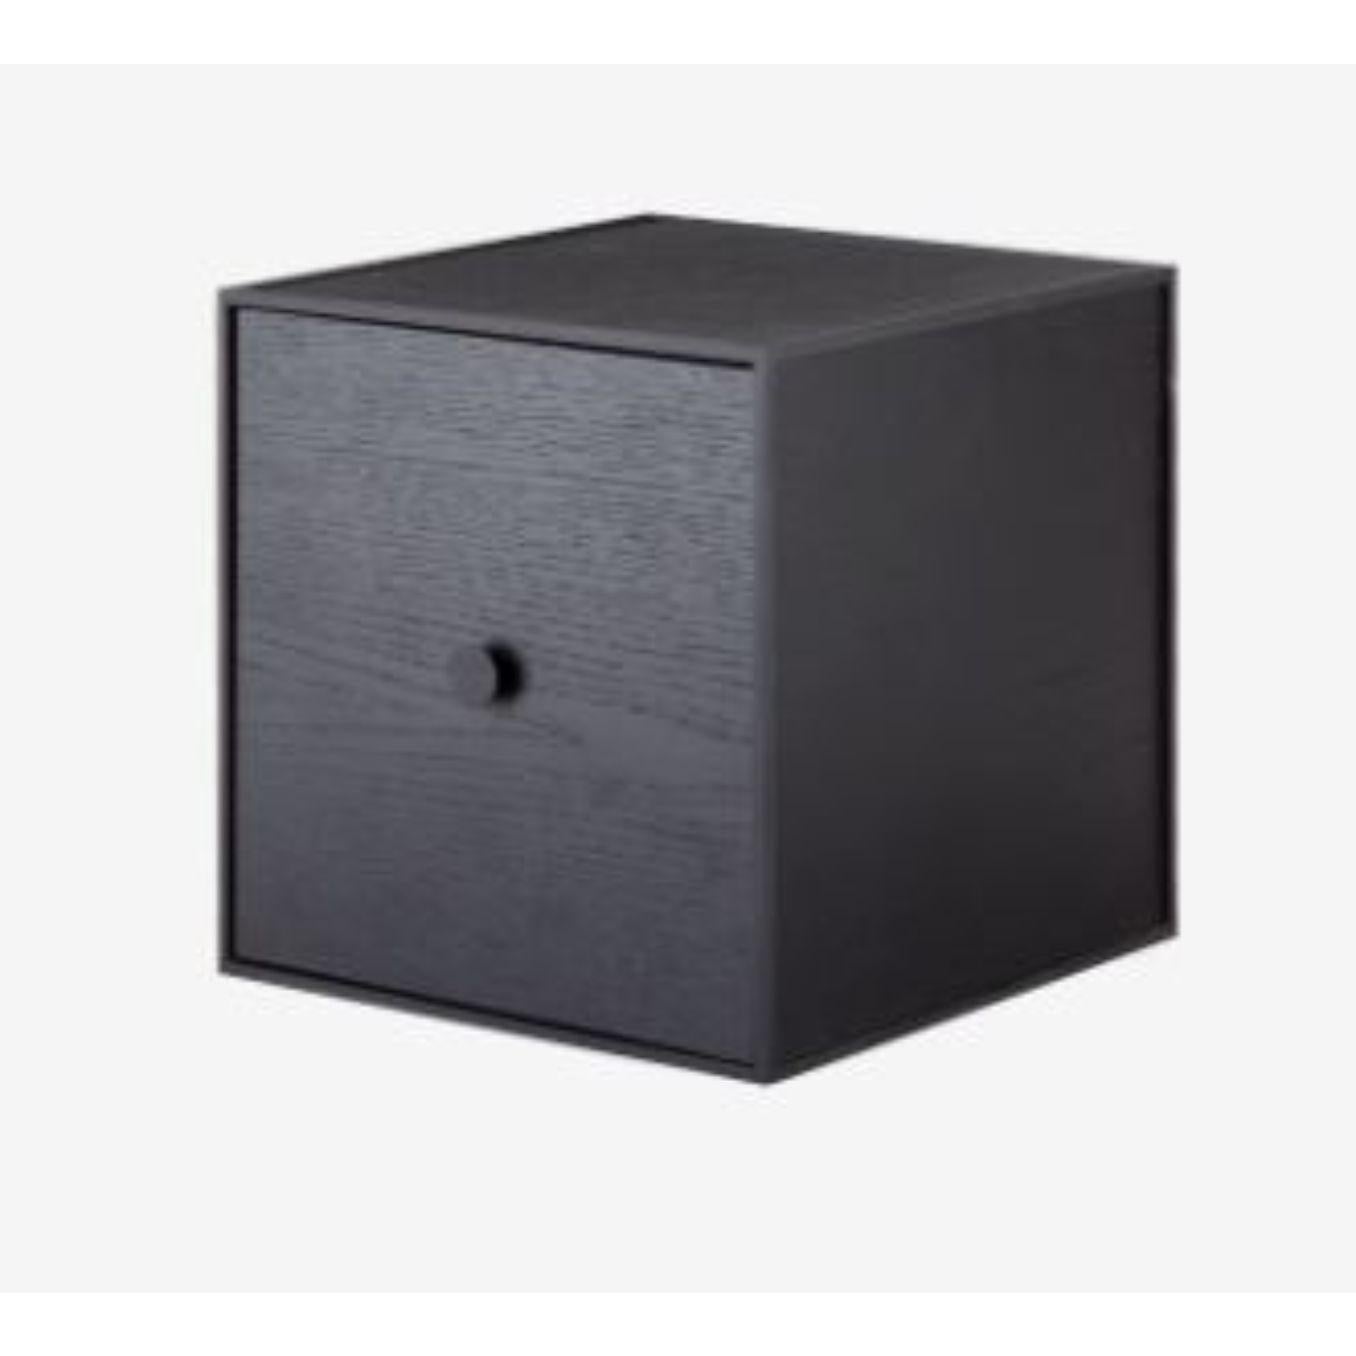 35 black ash frame box with door by Lassen.
Dimensions: W 35 x D 35 x H 35 cm 
Materials: Finér, melamin, melamin, melamine, metal, veneer.
Also available in different colours and dimensions.

By Lassen is a Danish design brand focused on